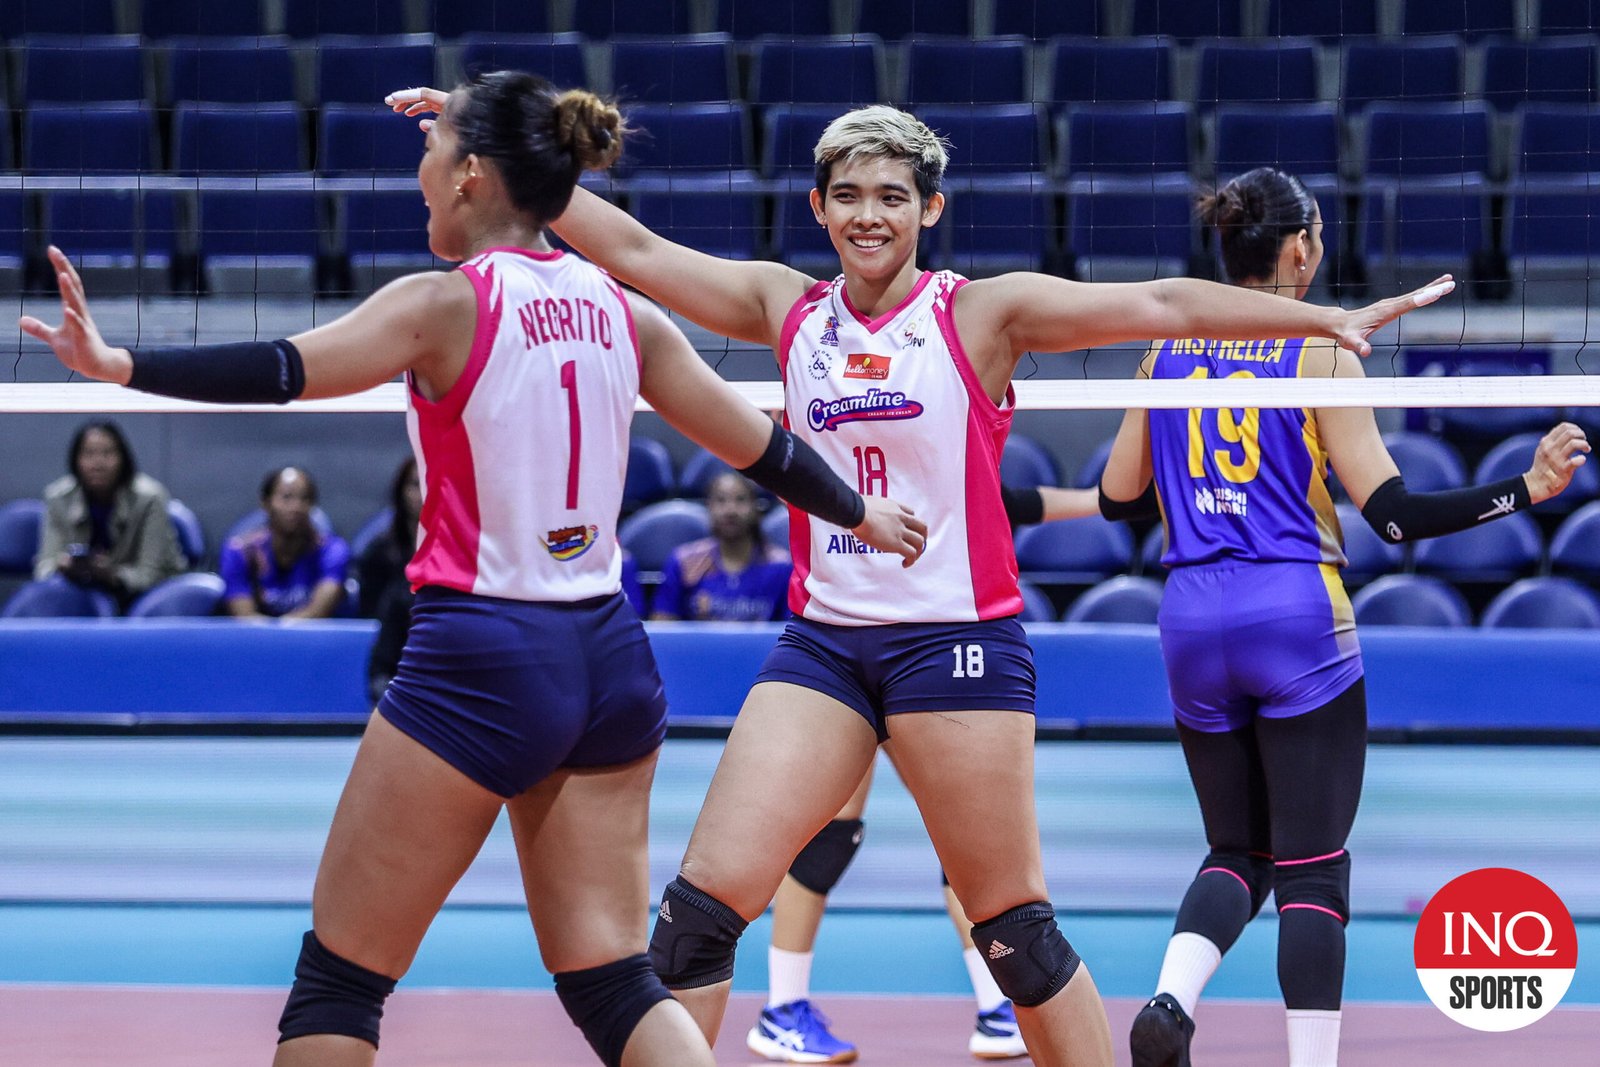 Creamline crushes Capital1 to get back on track